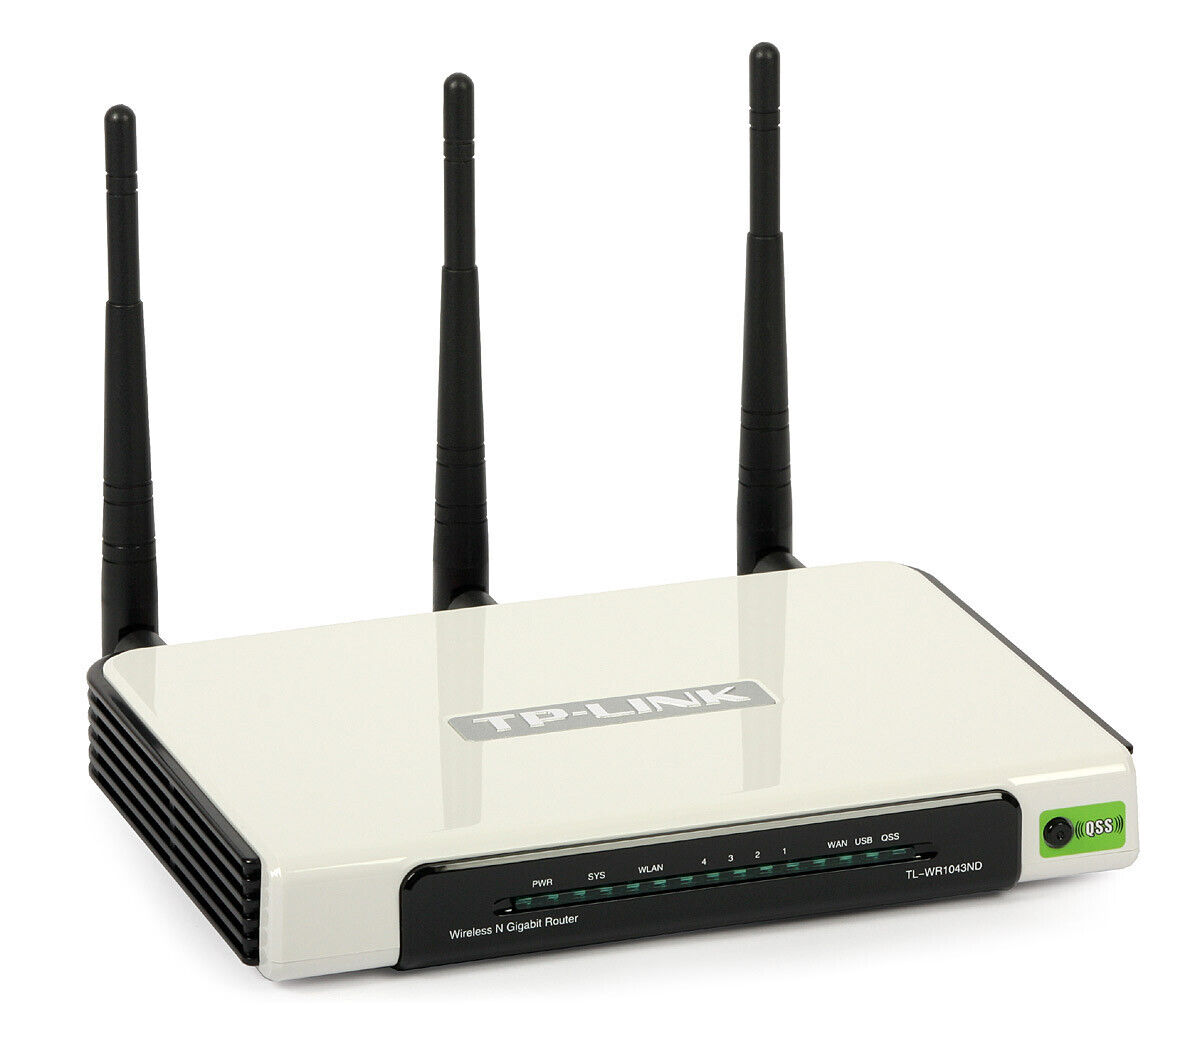 TP-Link TL-WR1043ND Wireless 300Mbps Gigabit Router, IPv6, LibreCMC Preinstalled